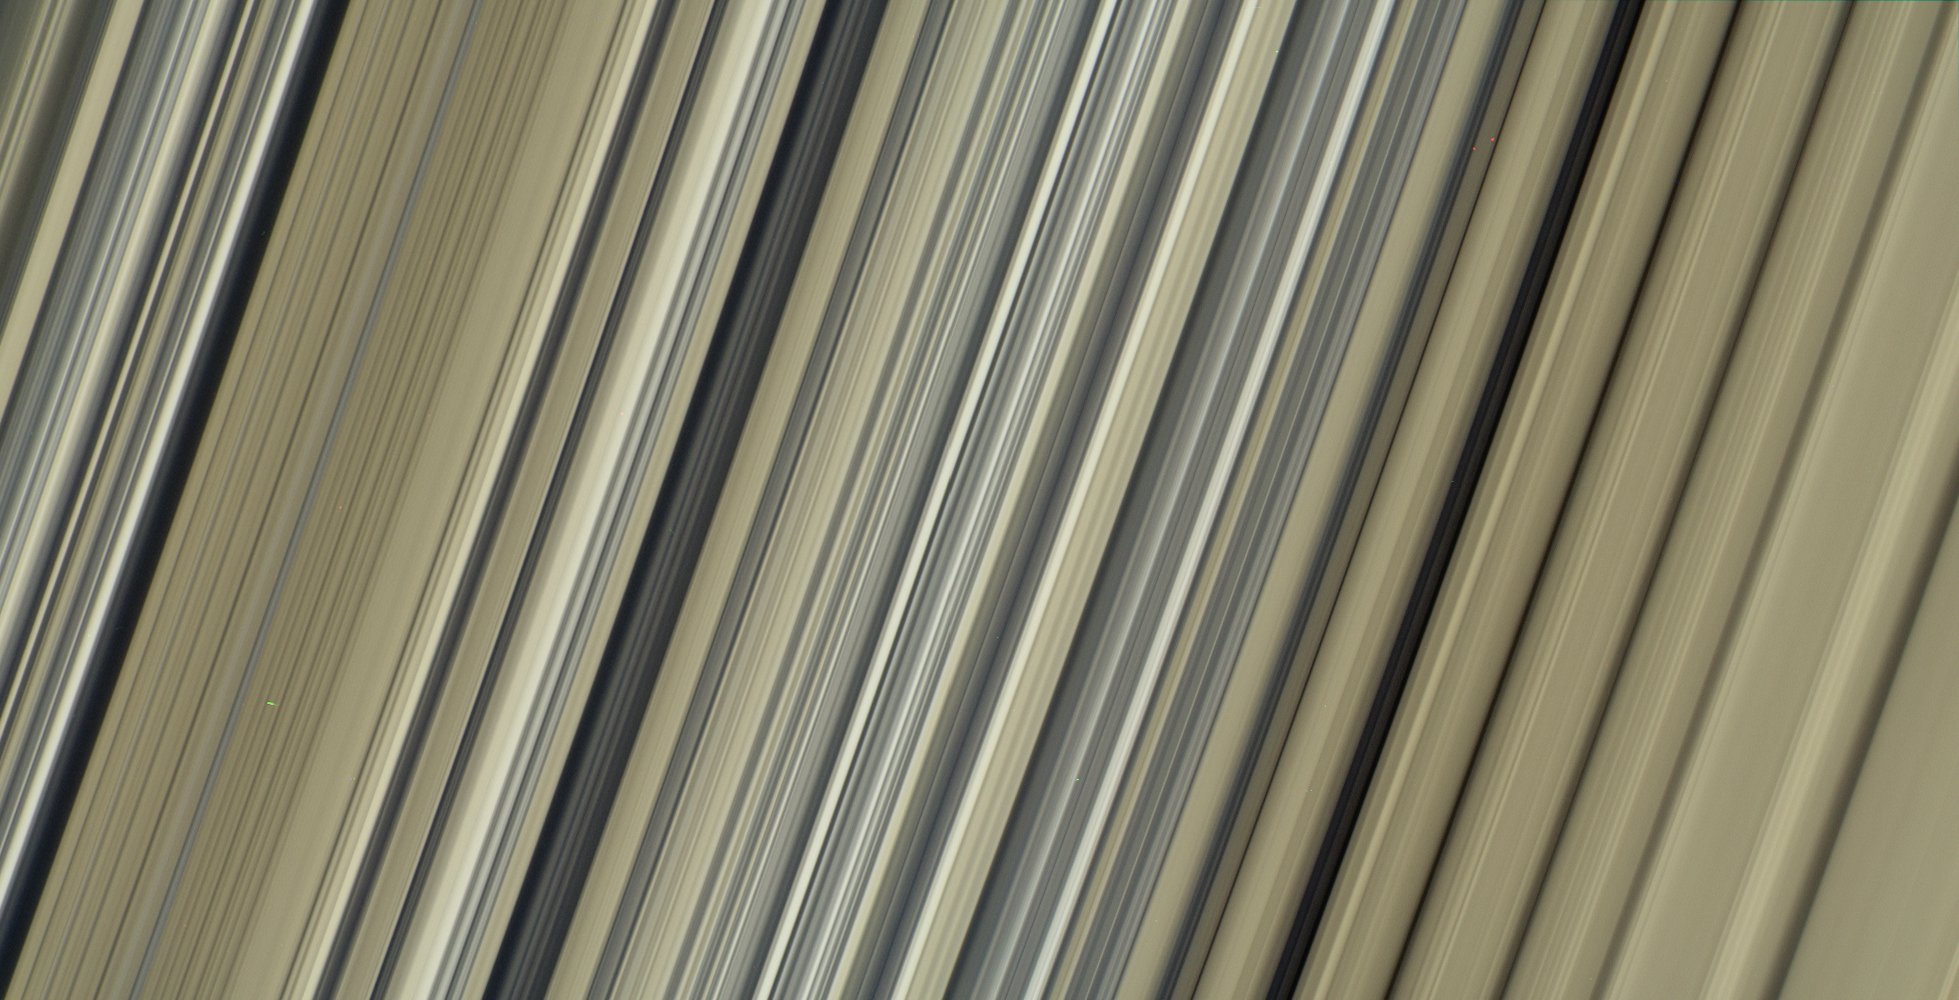 These are the highest-resolution color images of any part of Saturn's rings, to date, showing a portion of the inner-central part of the planet's B Ring. (NASA / JPL / Space Science Institute.)